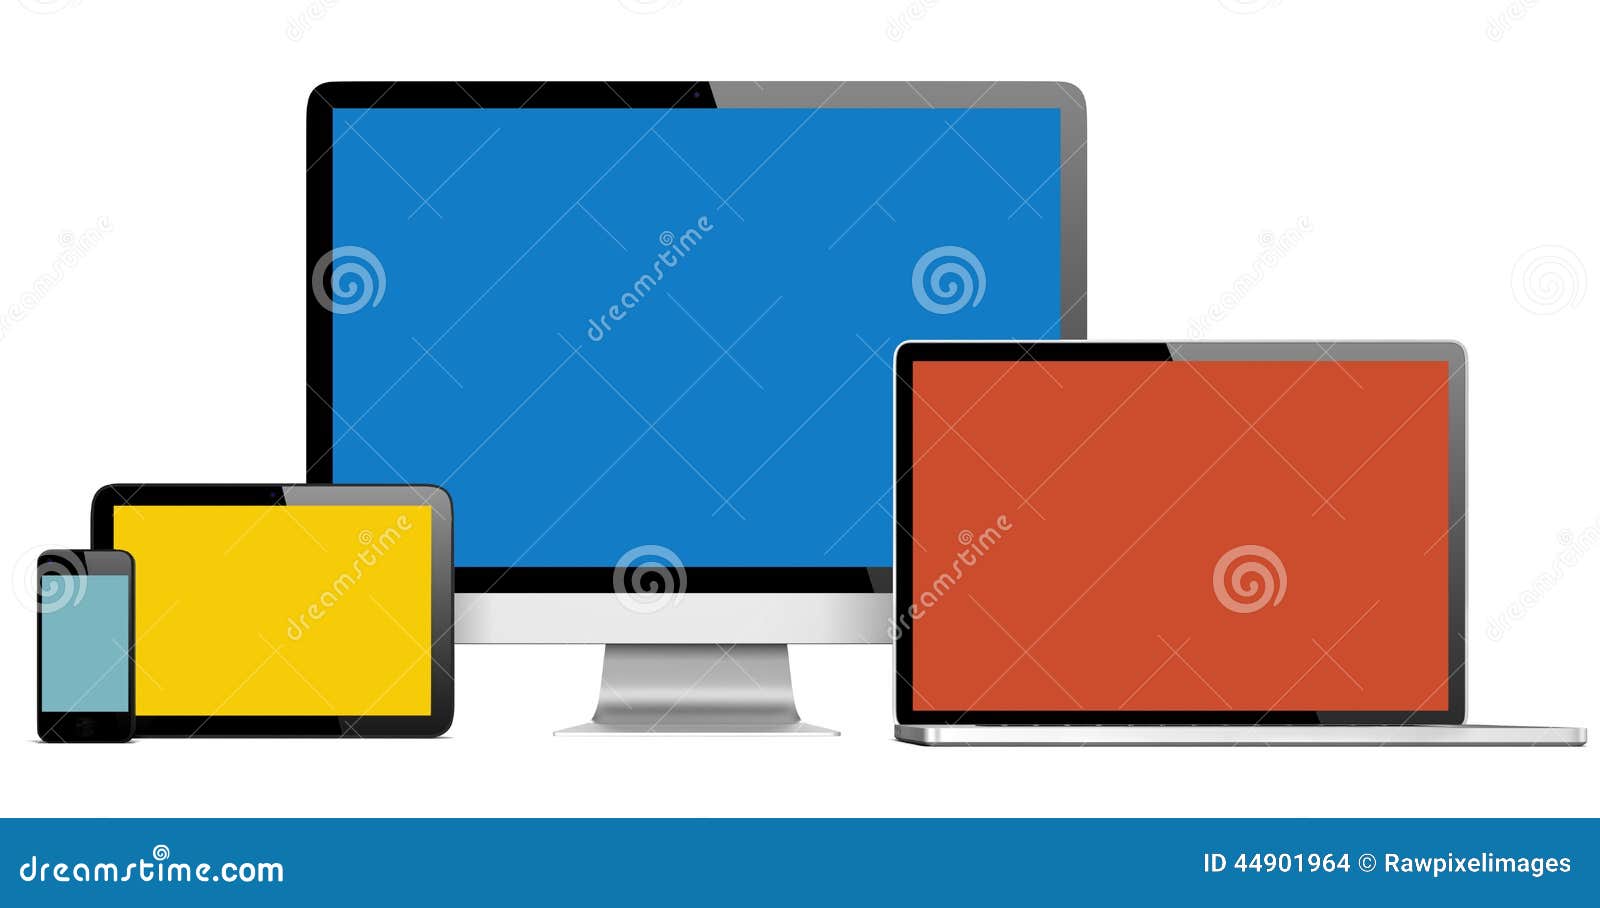 group of digital devices with colourful screens